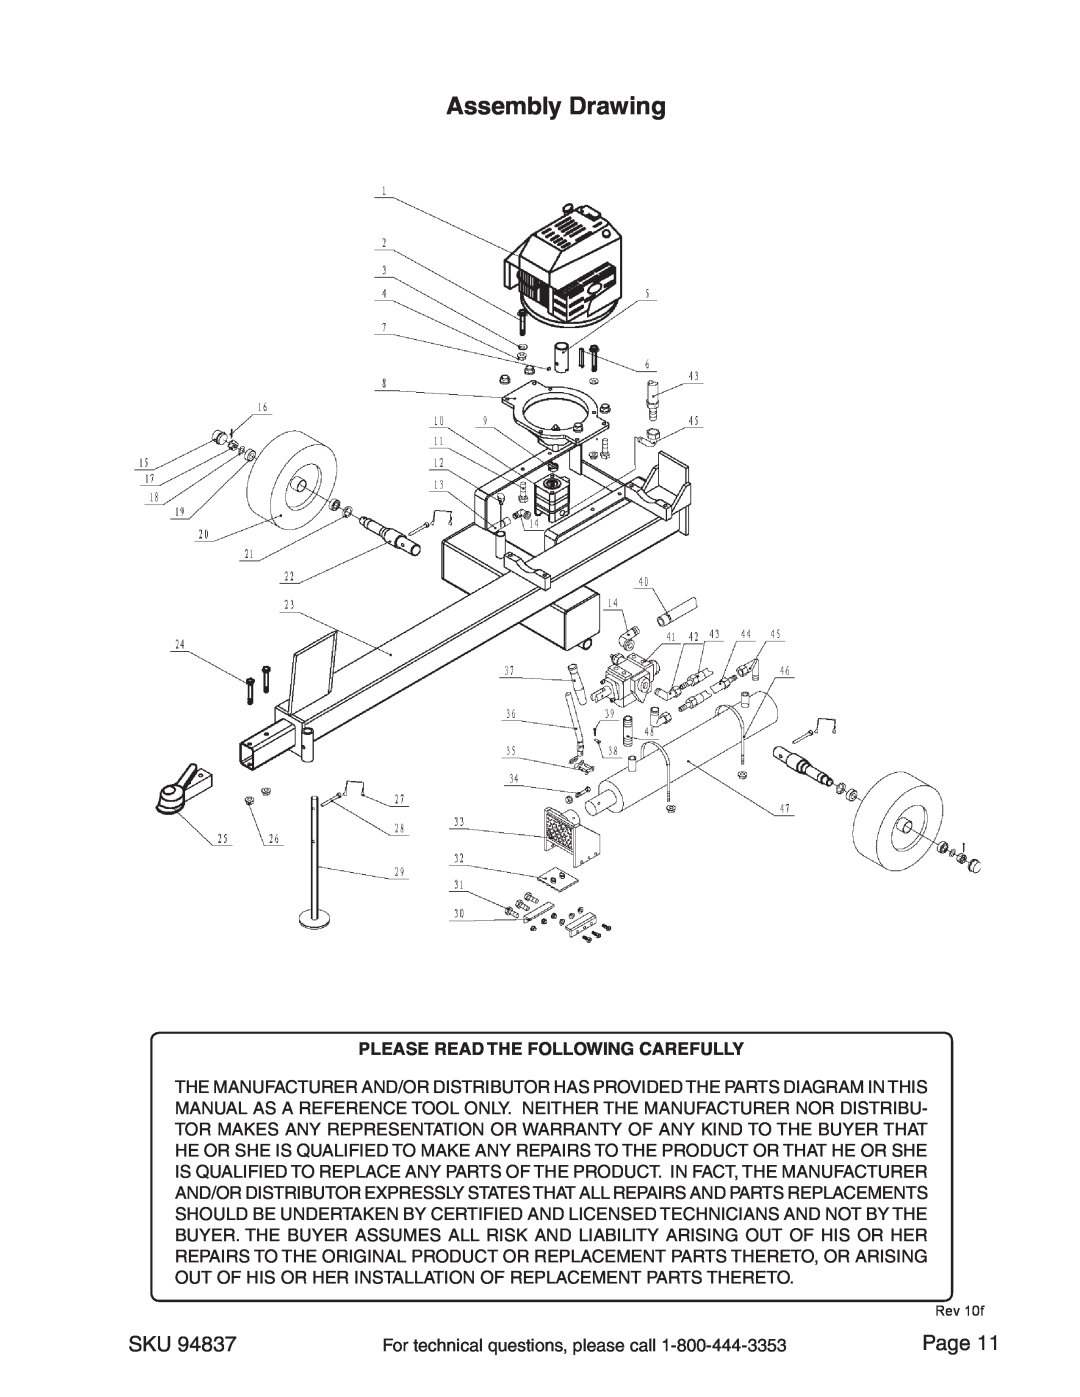 Harbor Freight Tools 94837 manual Assembly Drawing, Page, Please Read The Following Carefully 